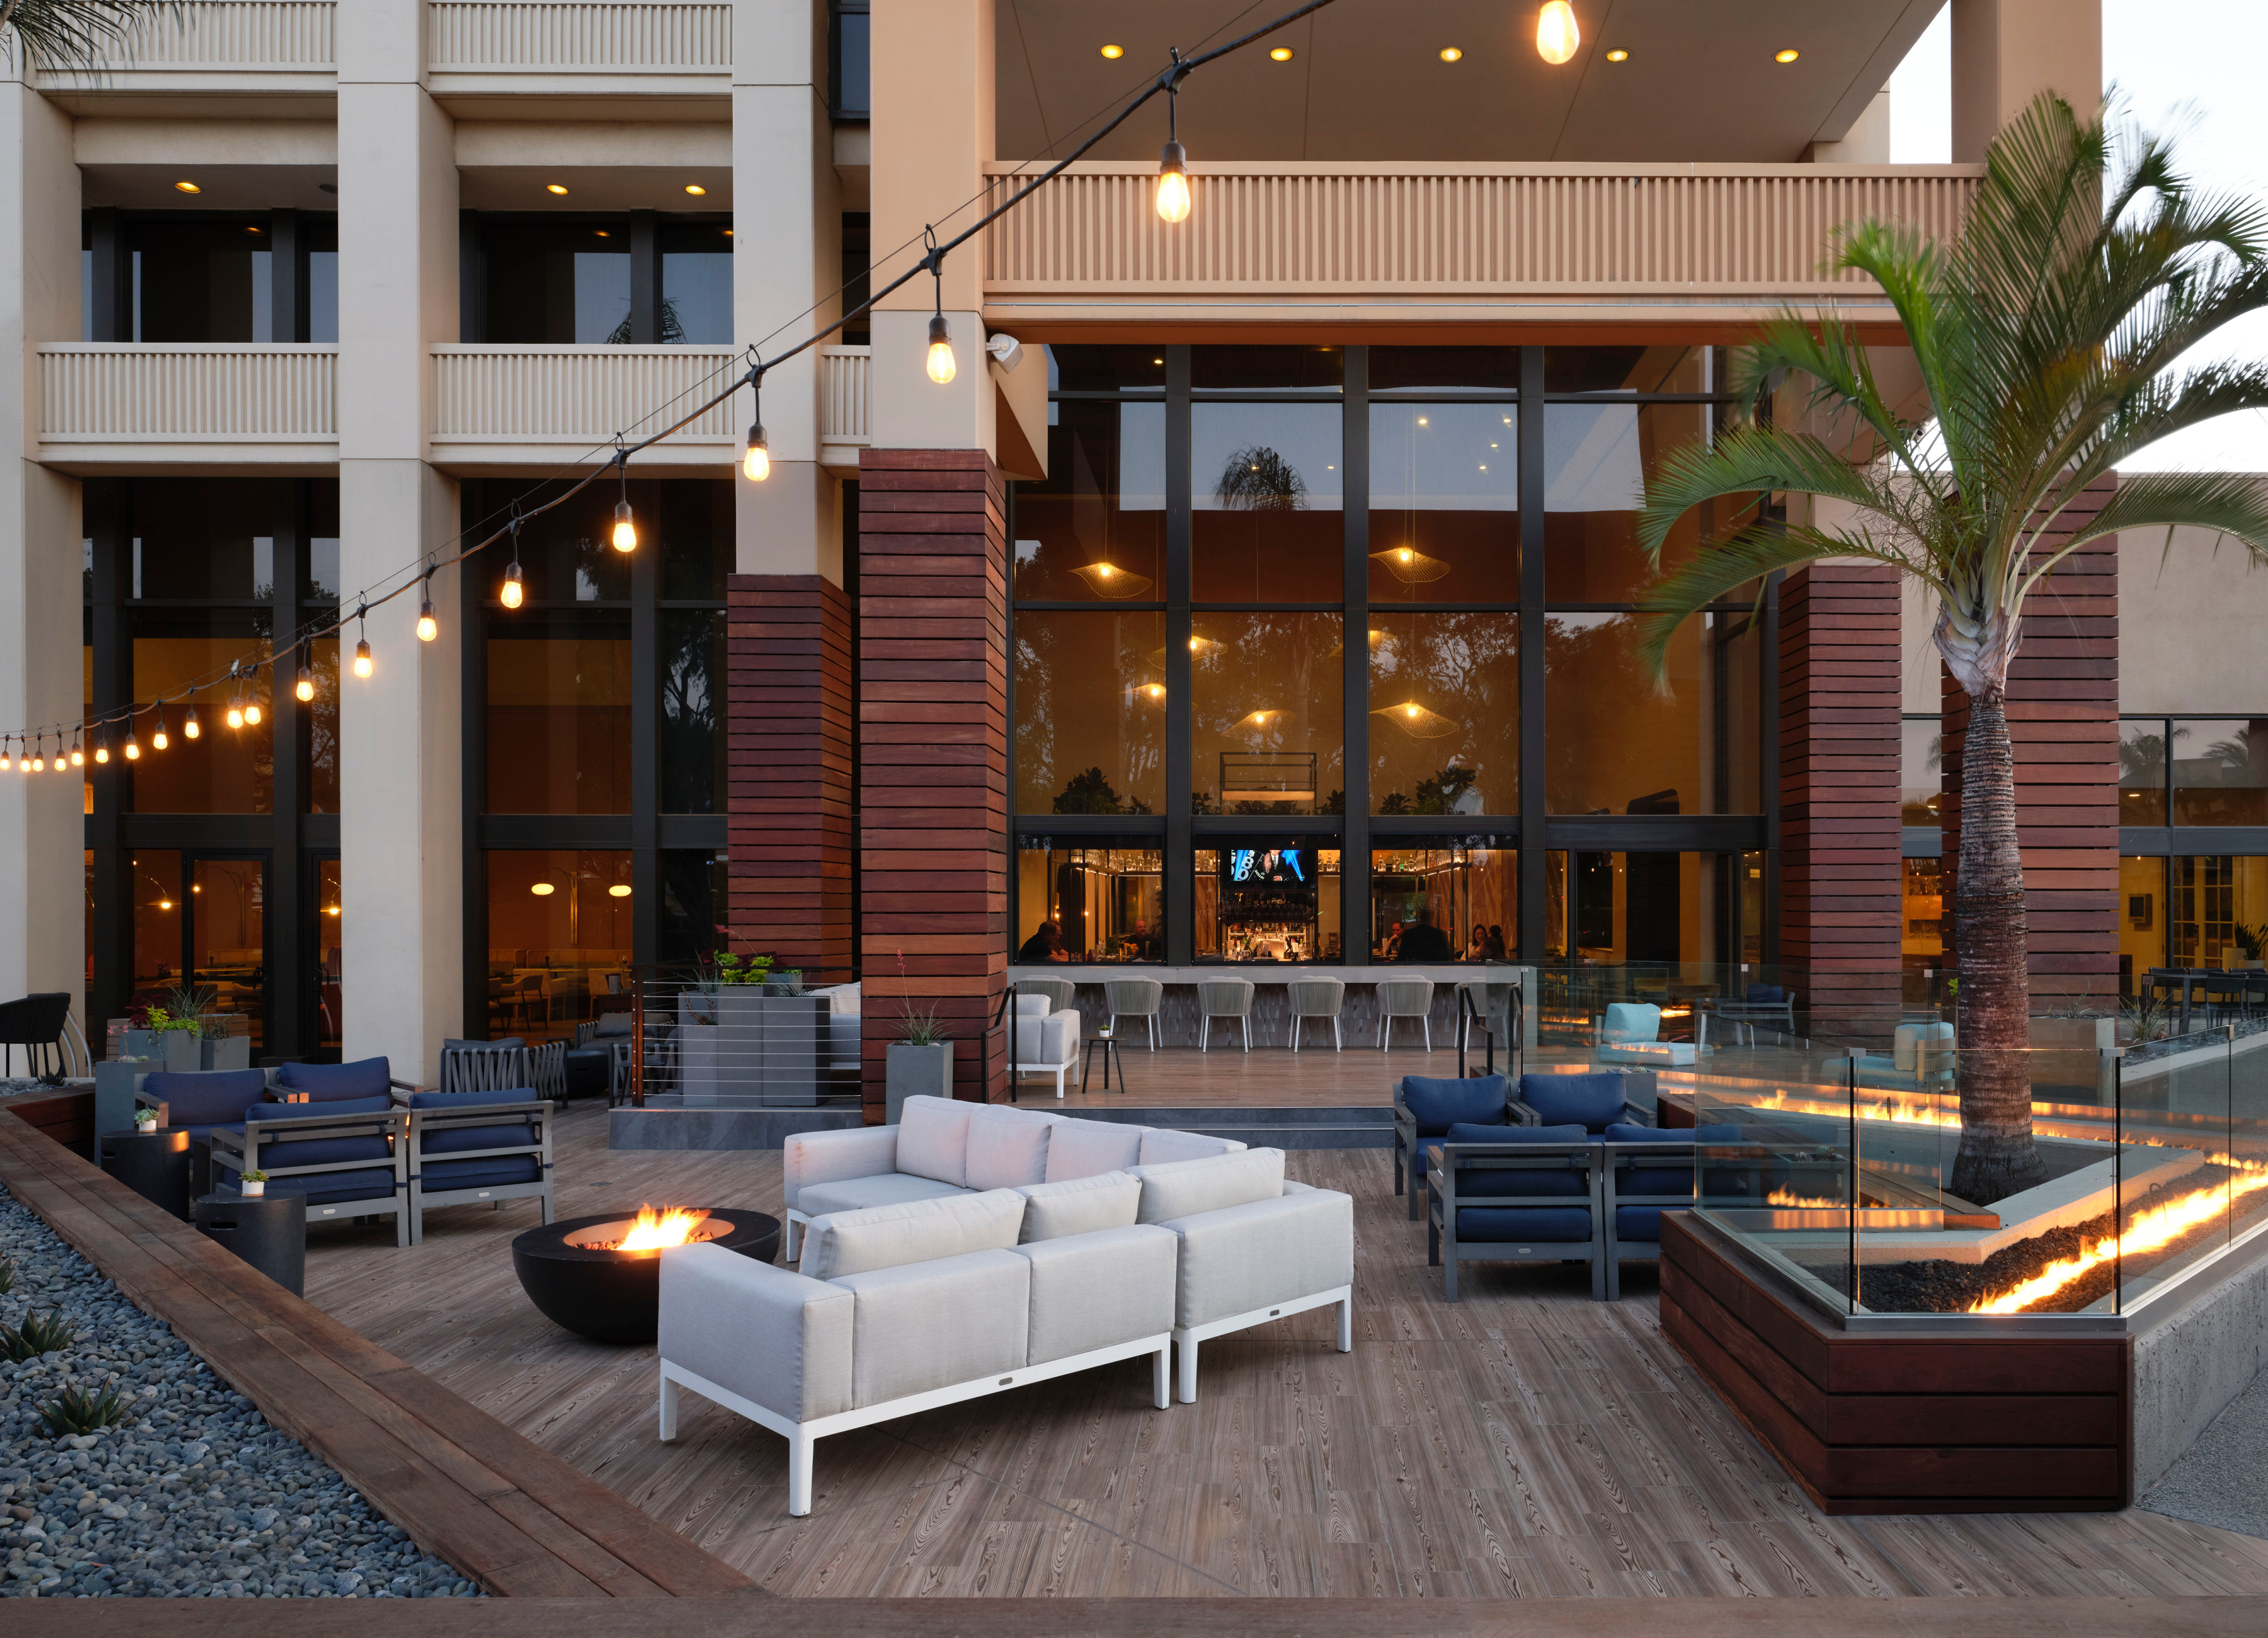 outdoor patio with firepits